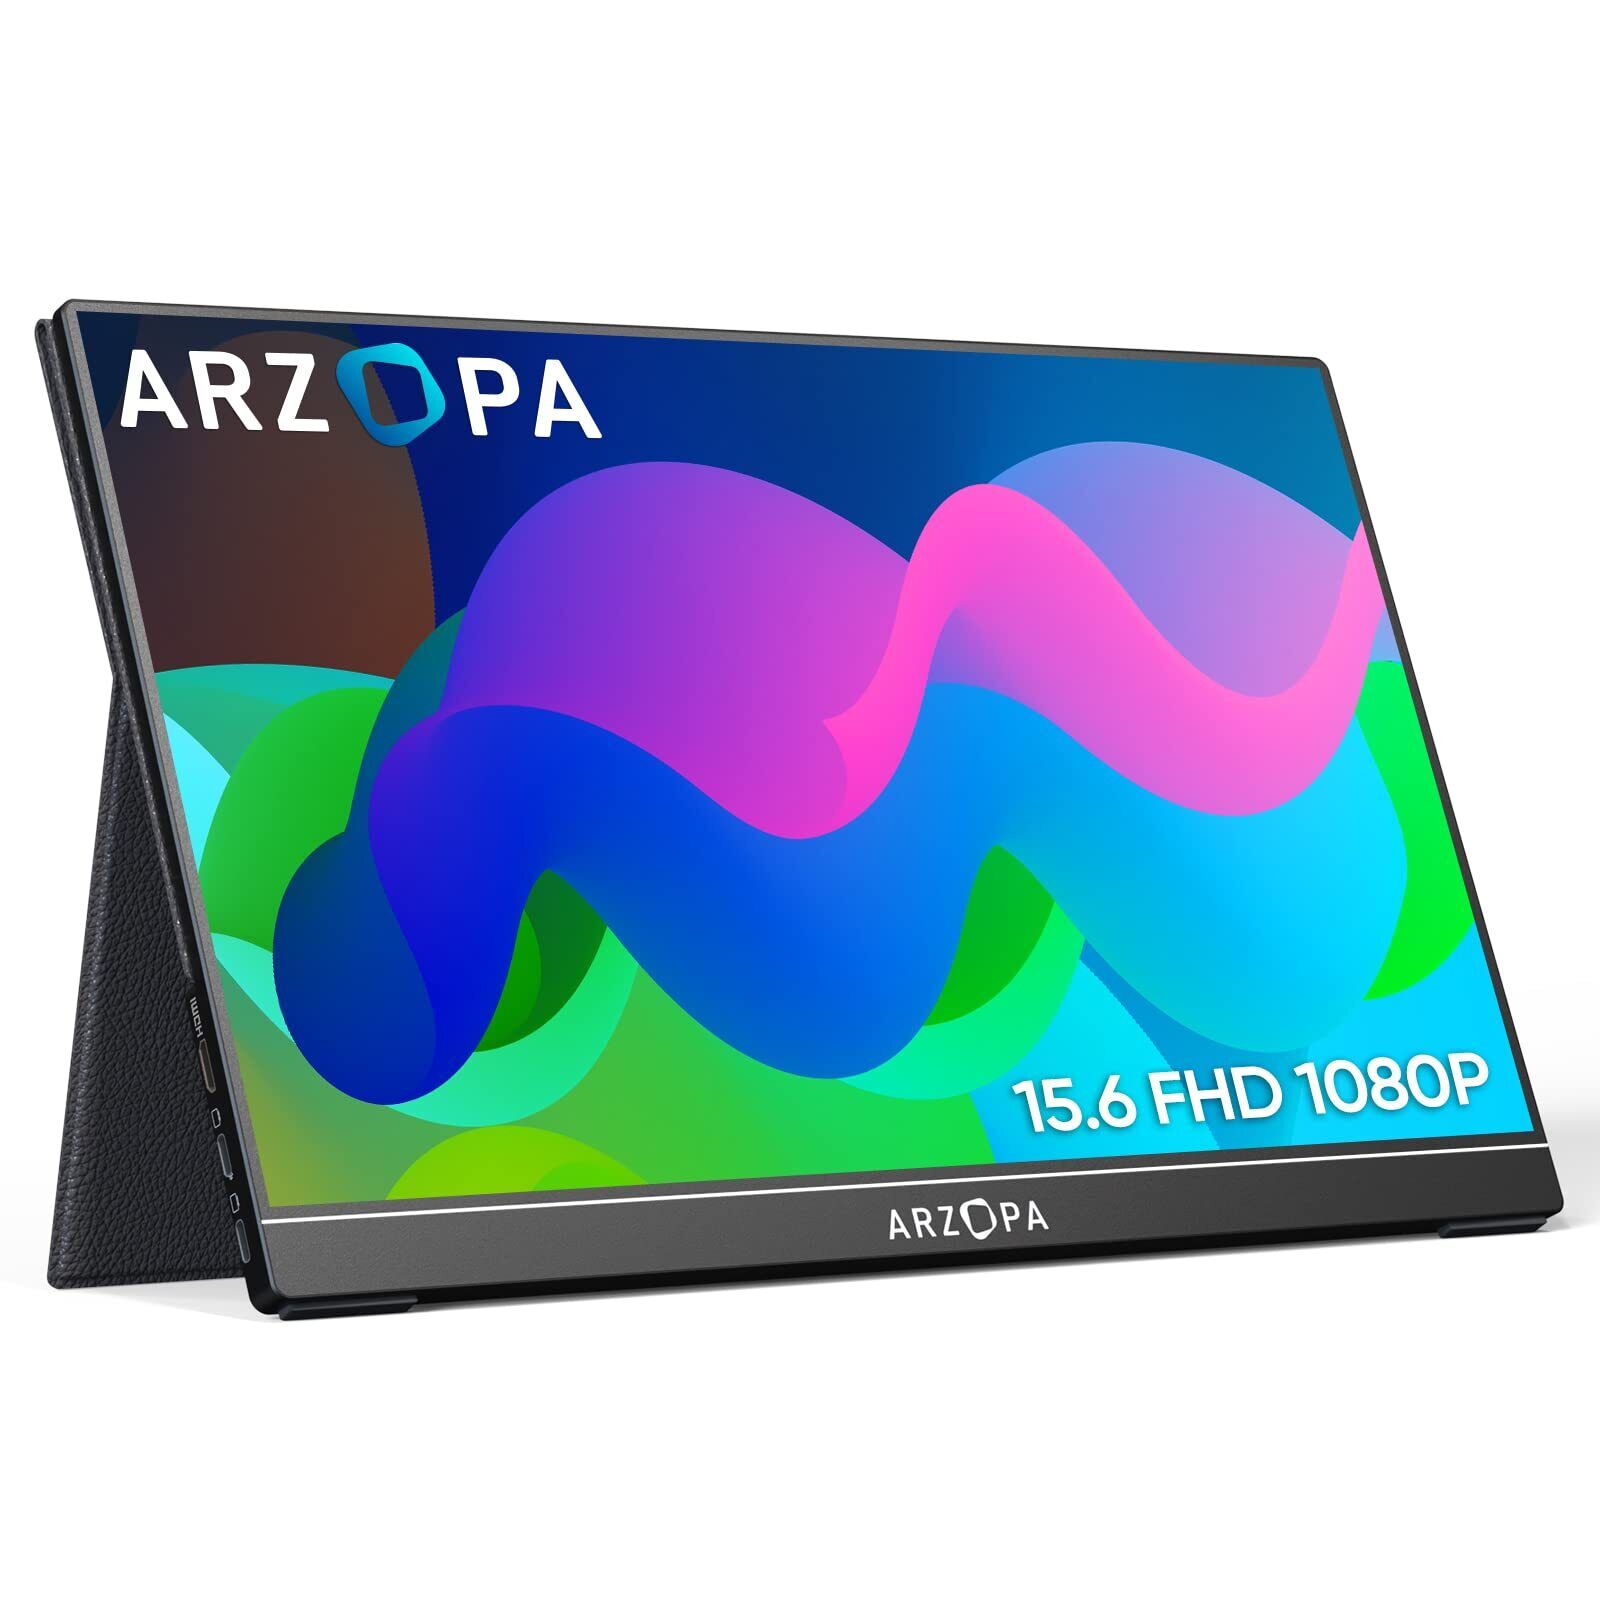 ARZOPA Portable Monitor 15.6'' FHD 1080P Portable Laptop Monitor IPS A1-GAMUT